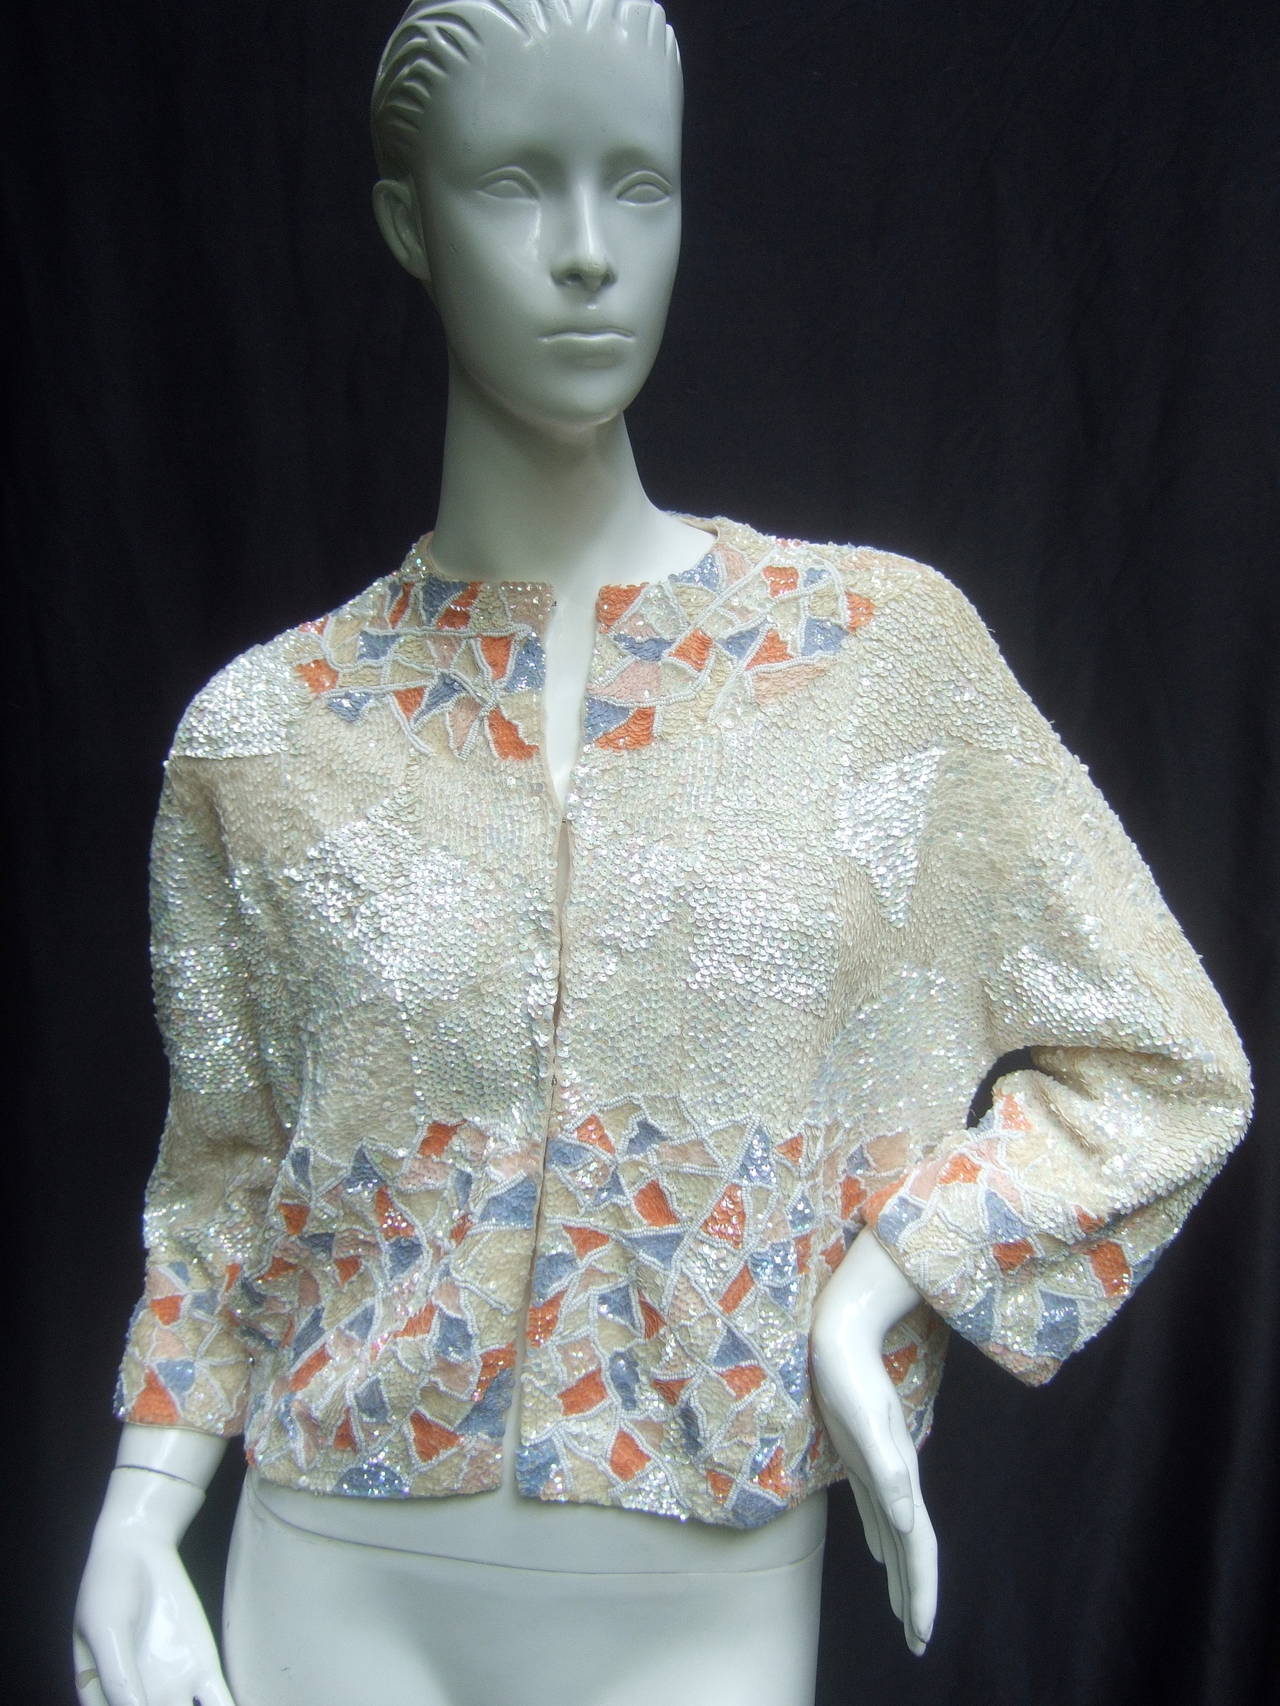 Extravagant sequined & beaded iridescent cardigan c 1960
The hand sequined cardigan is a mosaic of contiguous
glittering ivory & pastel embellishments 

The collar yoke, cuffs & borders are encrusted 
with pastel lavender, pale pink & coral